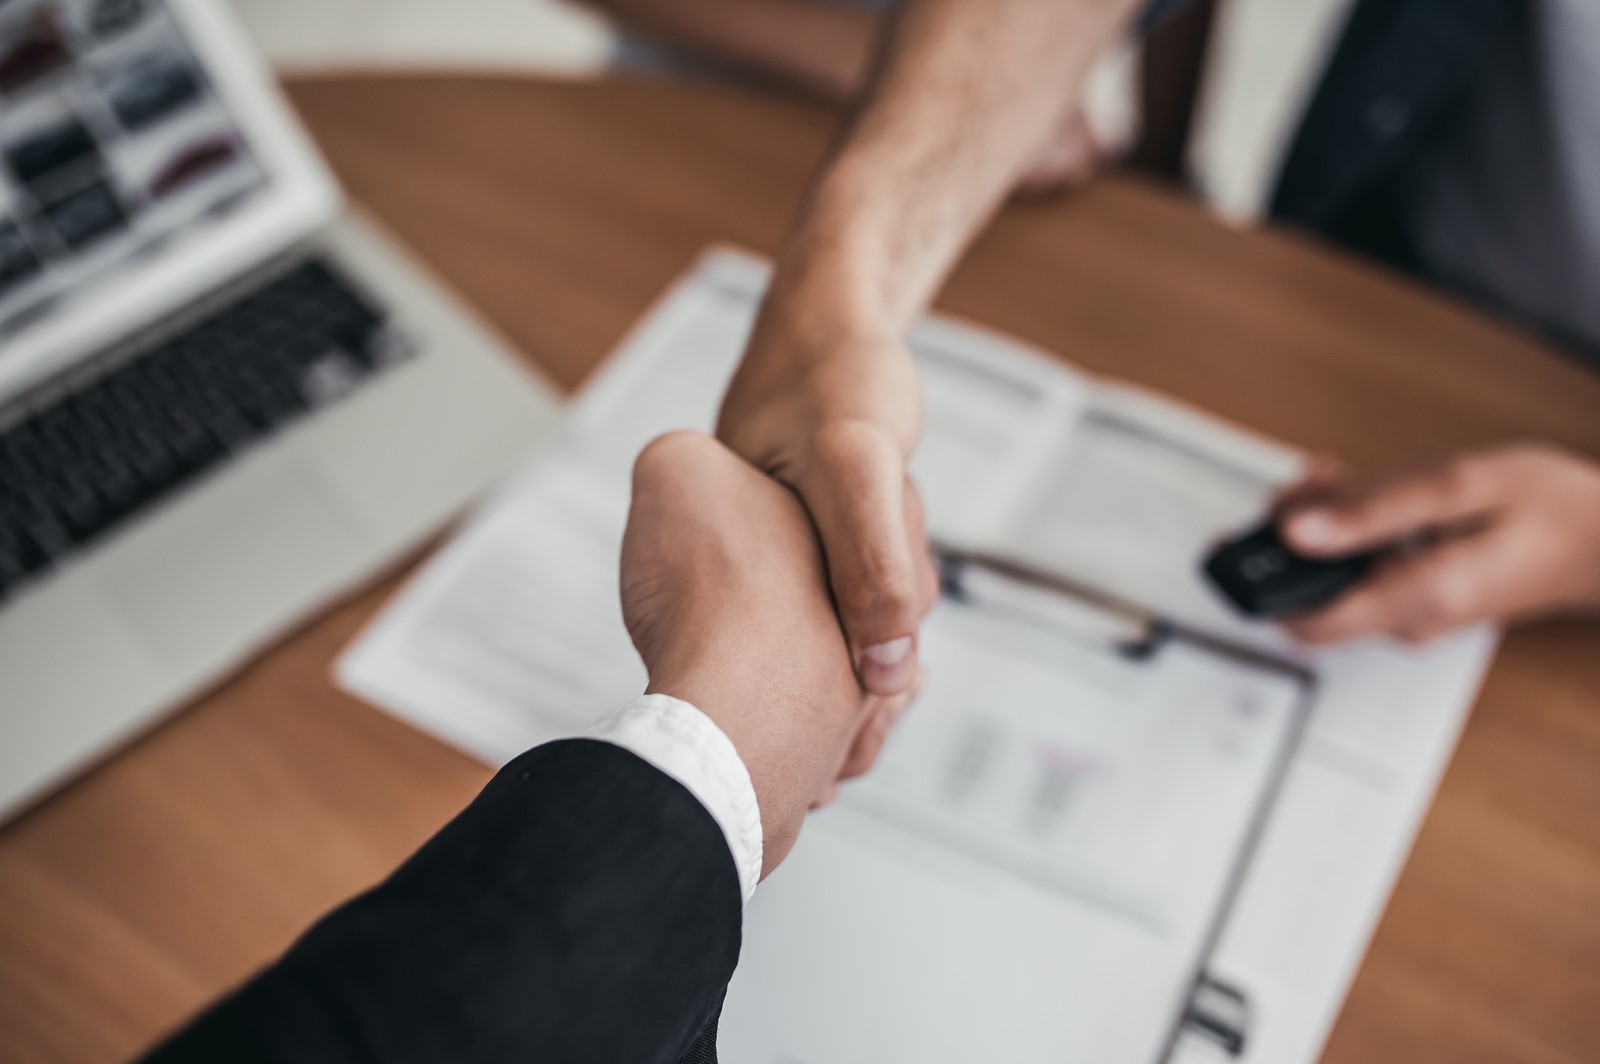 Two people shaking hands over business